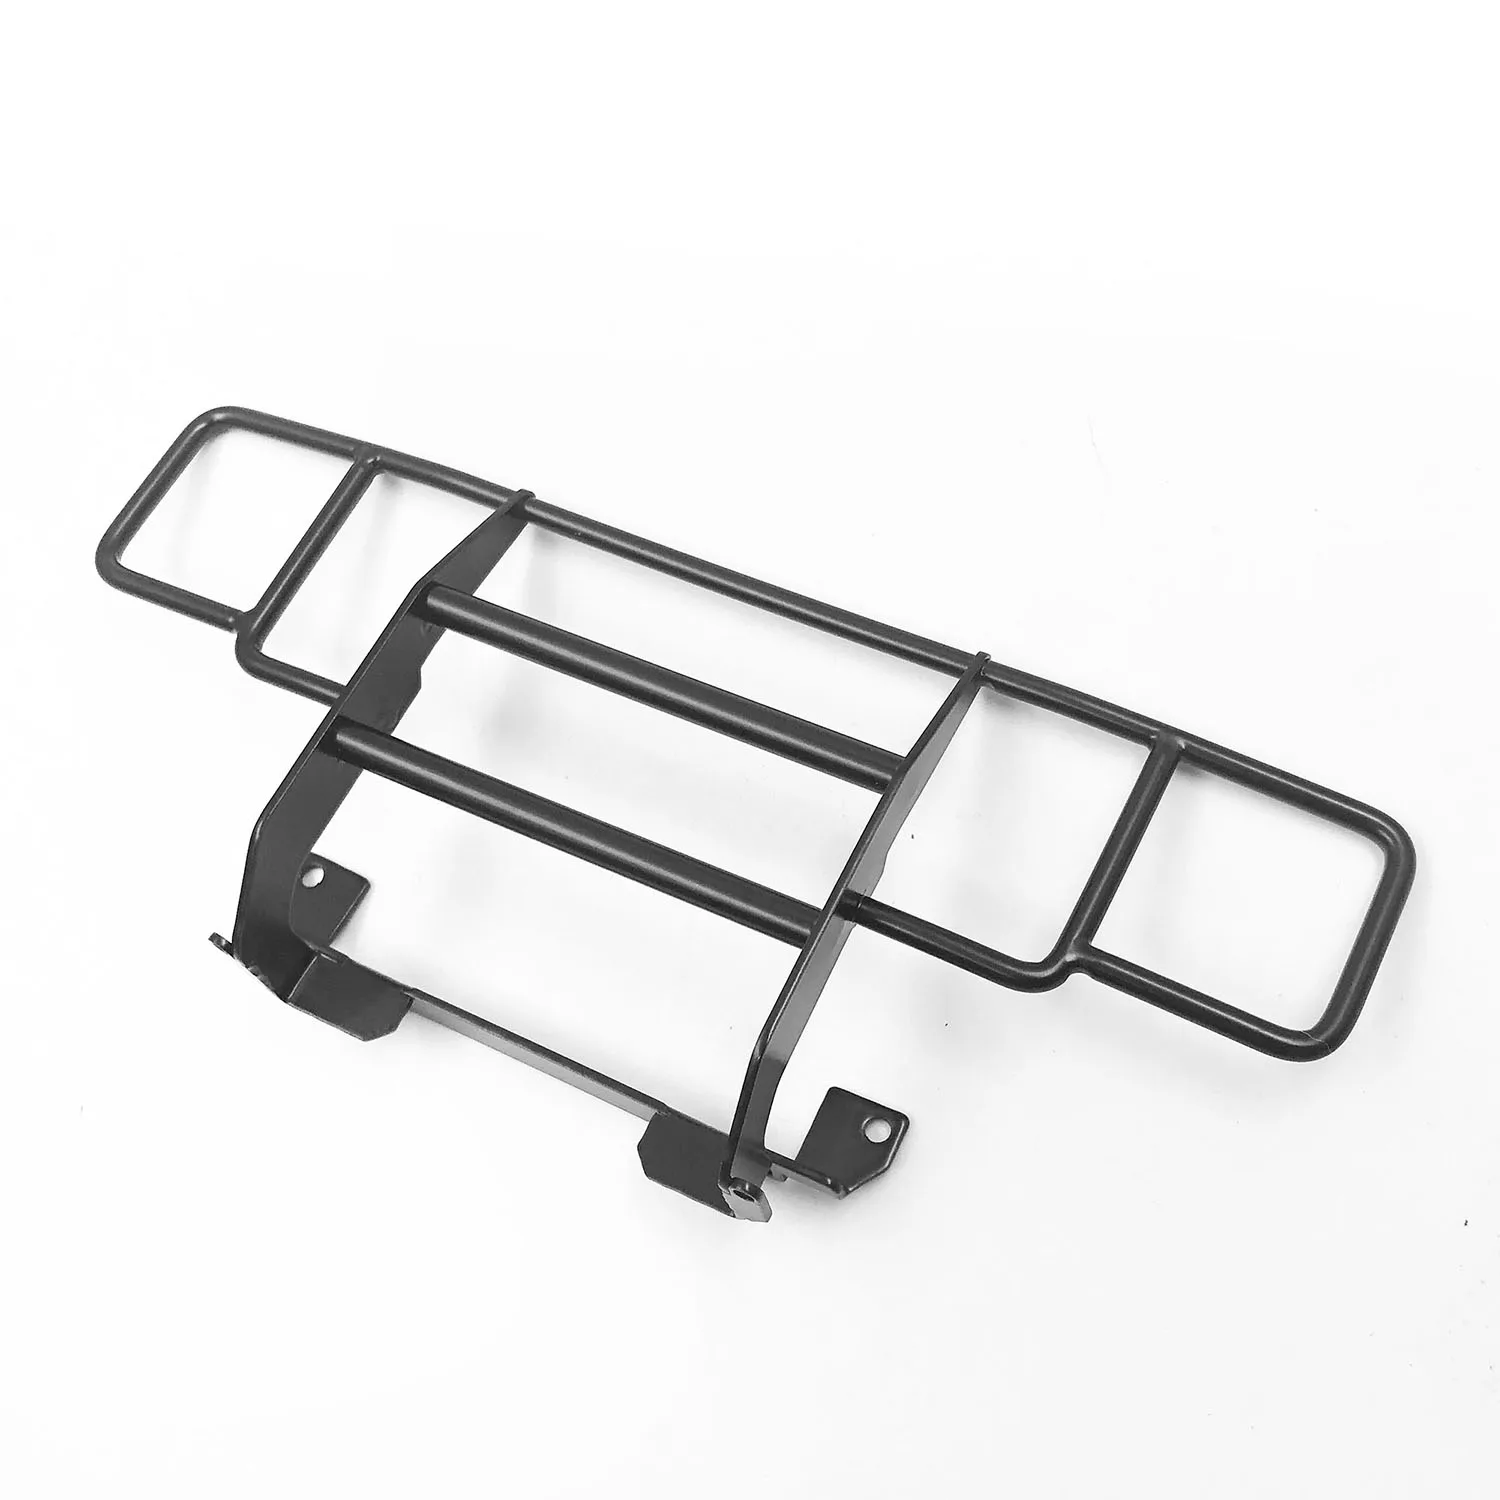 

Front Bumper Fence CChand Parts for 1/10 RC Off-road Vehicle TRX4 Chevy K5 Blazer Crawler Car TH21600-SMT2